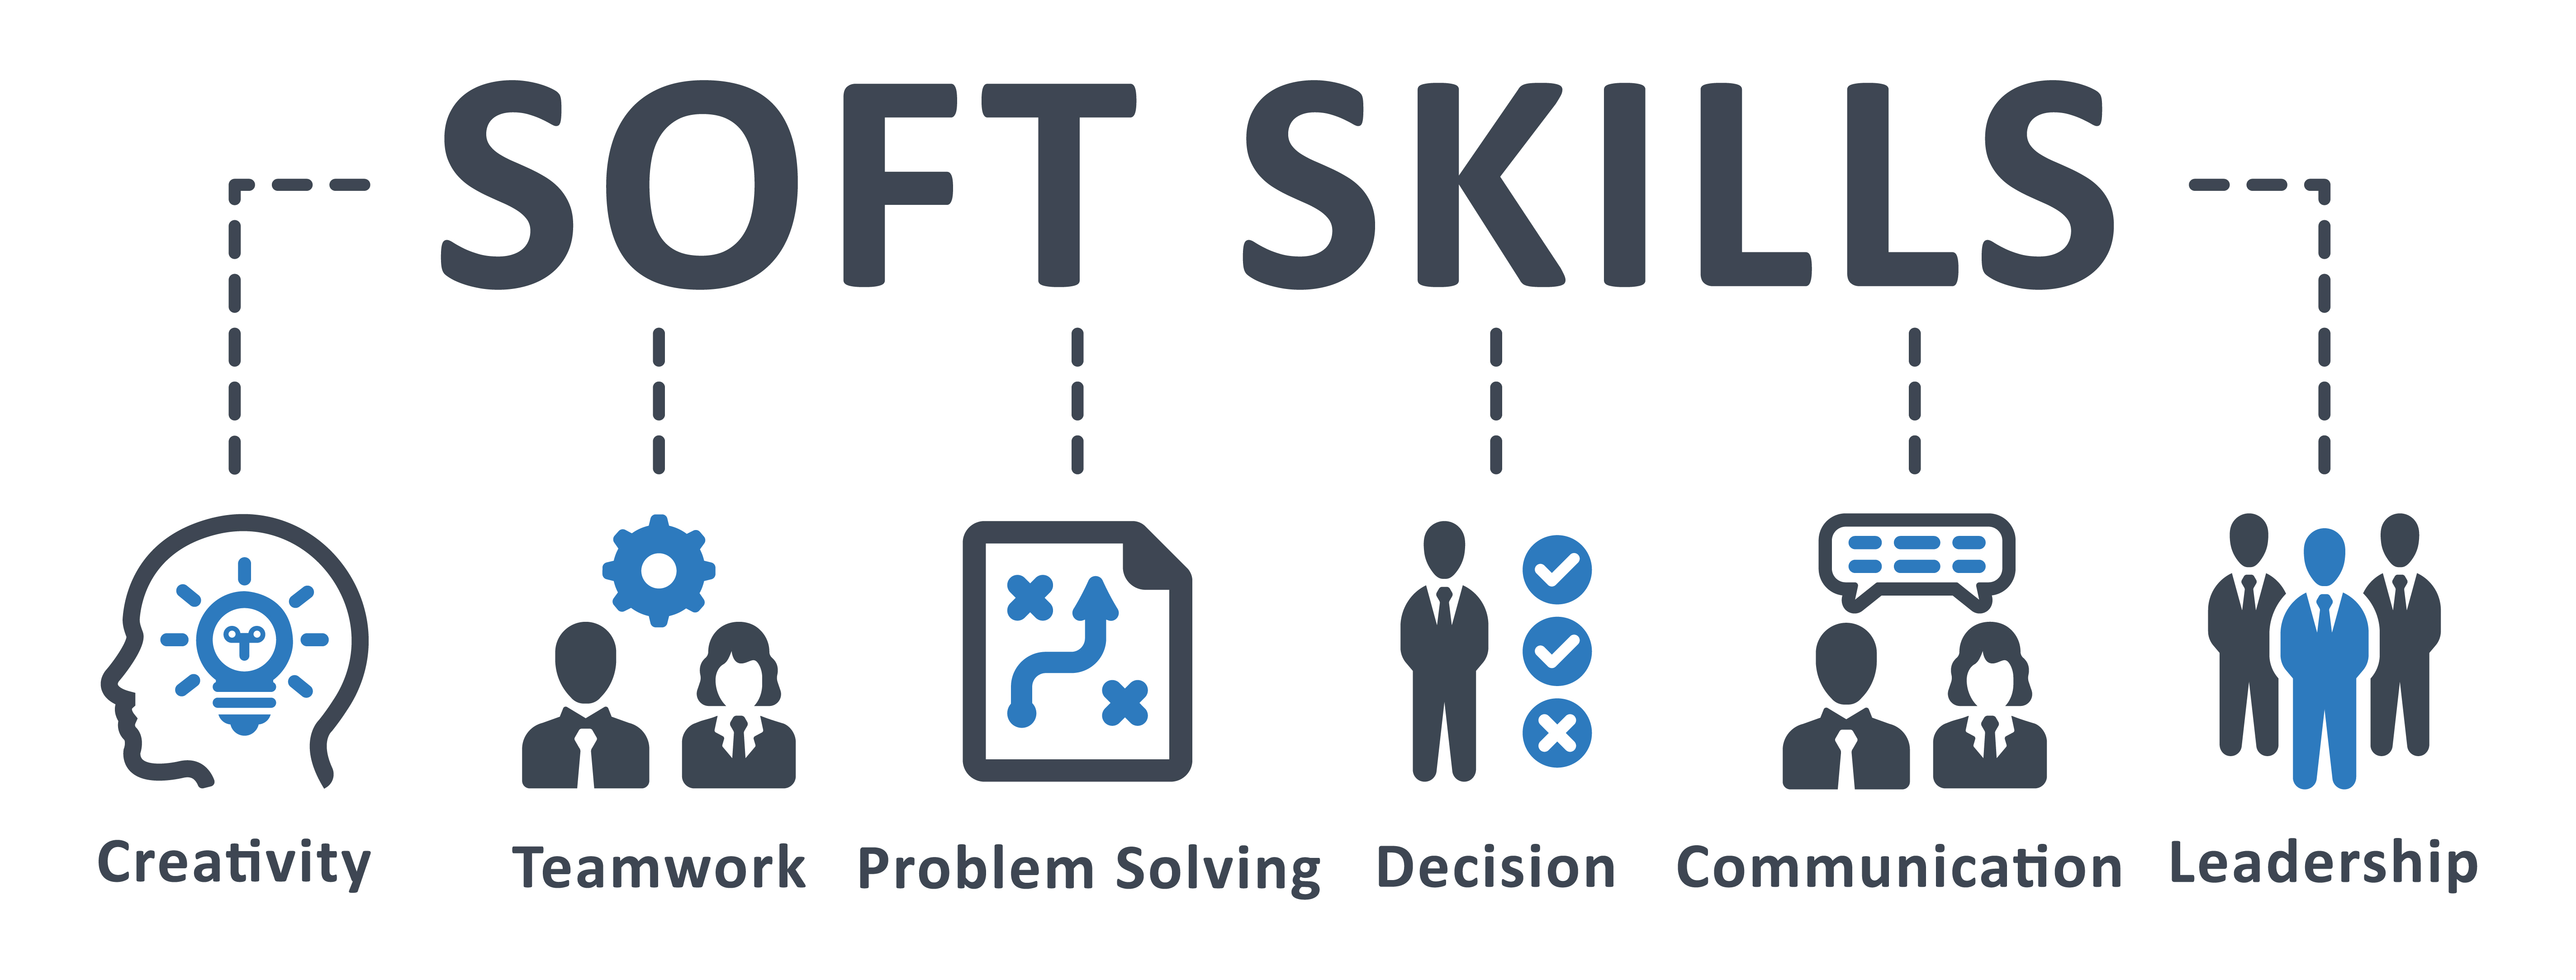 The Power of Soft Skills: How Communication and Teamwork Can Boost Your Tech Career